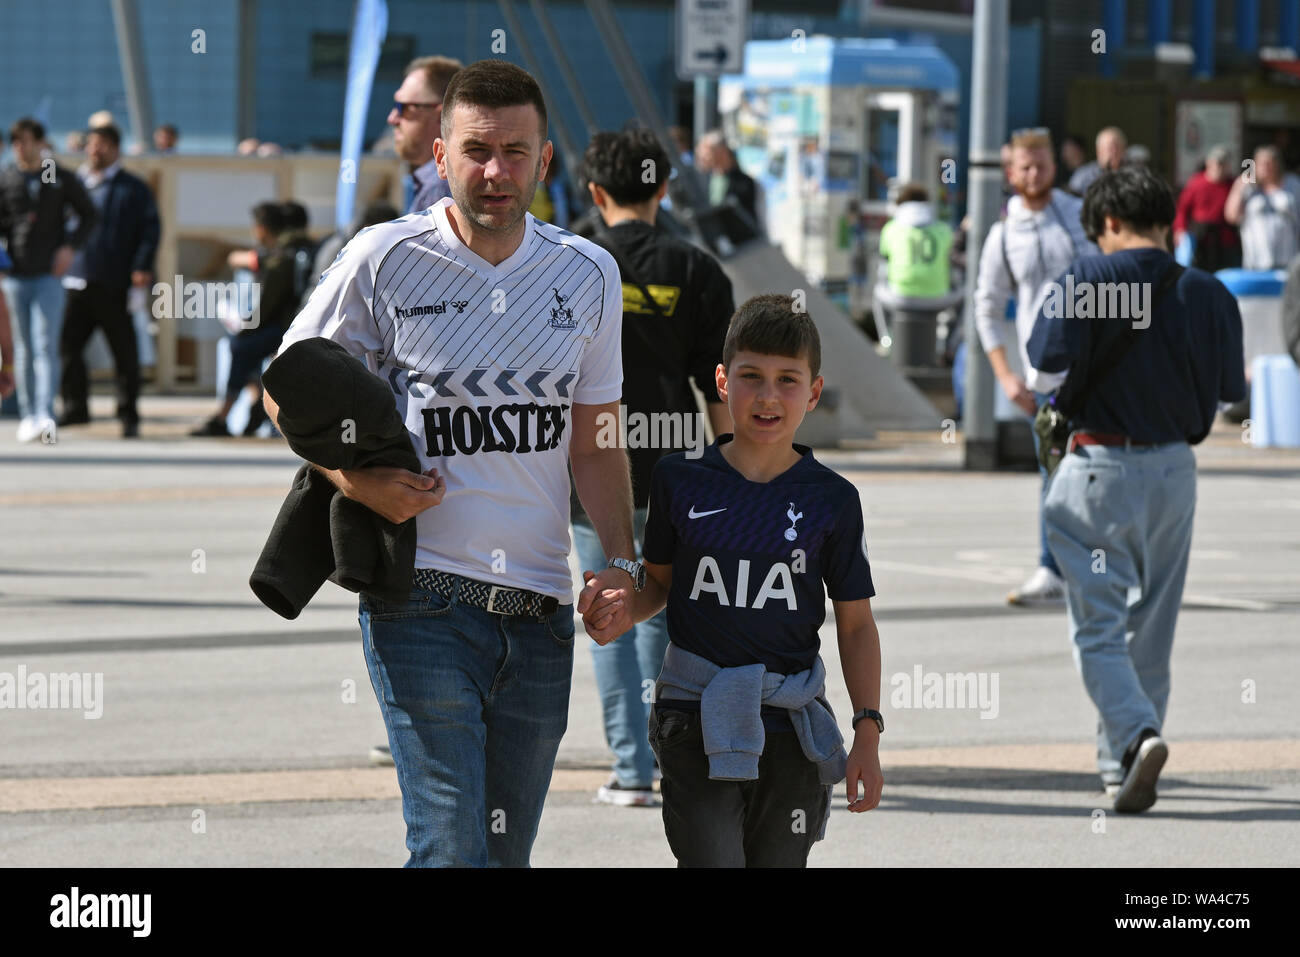 17th August 2019; Etihad Stadium, Manchester, Greater Manchester, England; Manchester City versus Tottenham Hotspur; Tottenham Hotspur fans arrive at the stadium for their game against Manchester City - Strictly Editorial Use Only. No use with unauthorized audio, video, data, fixture lists, club/league logos or 'live' services. Online in-match use limited to 120 images, no video emulation. Stock Photo